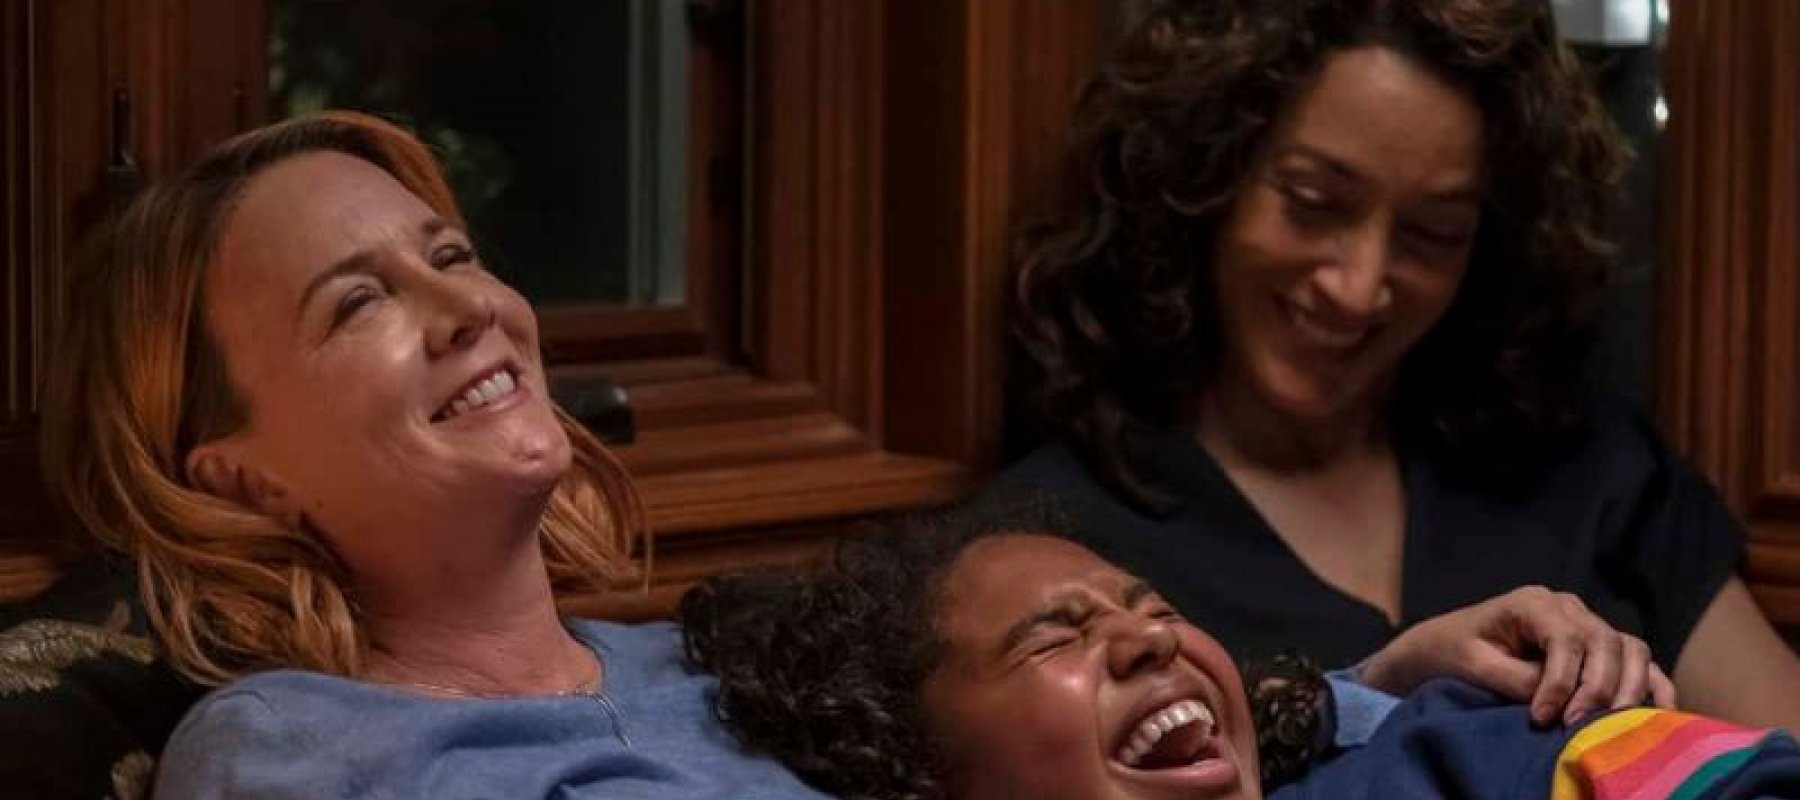 Alice and two multi ethnic friends laying next to eachother laughing and smiling at a joke.